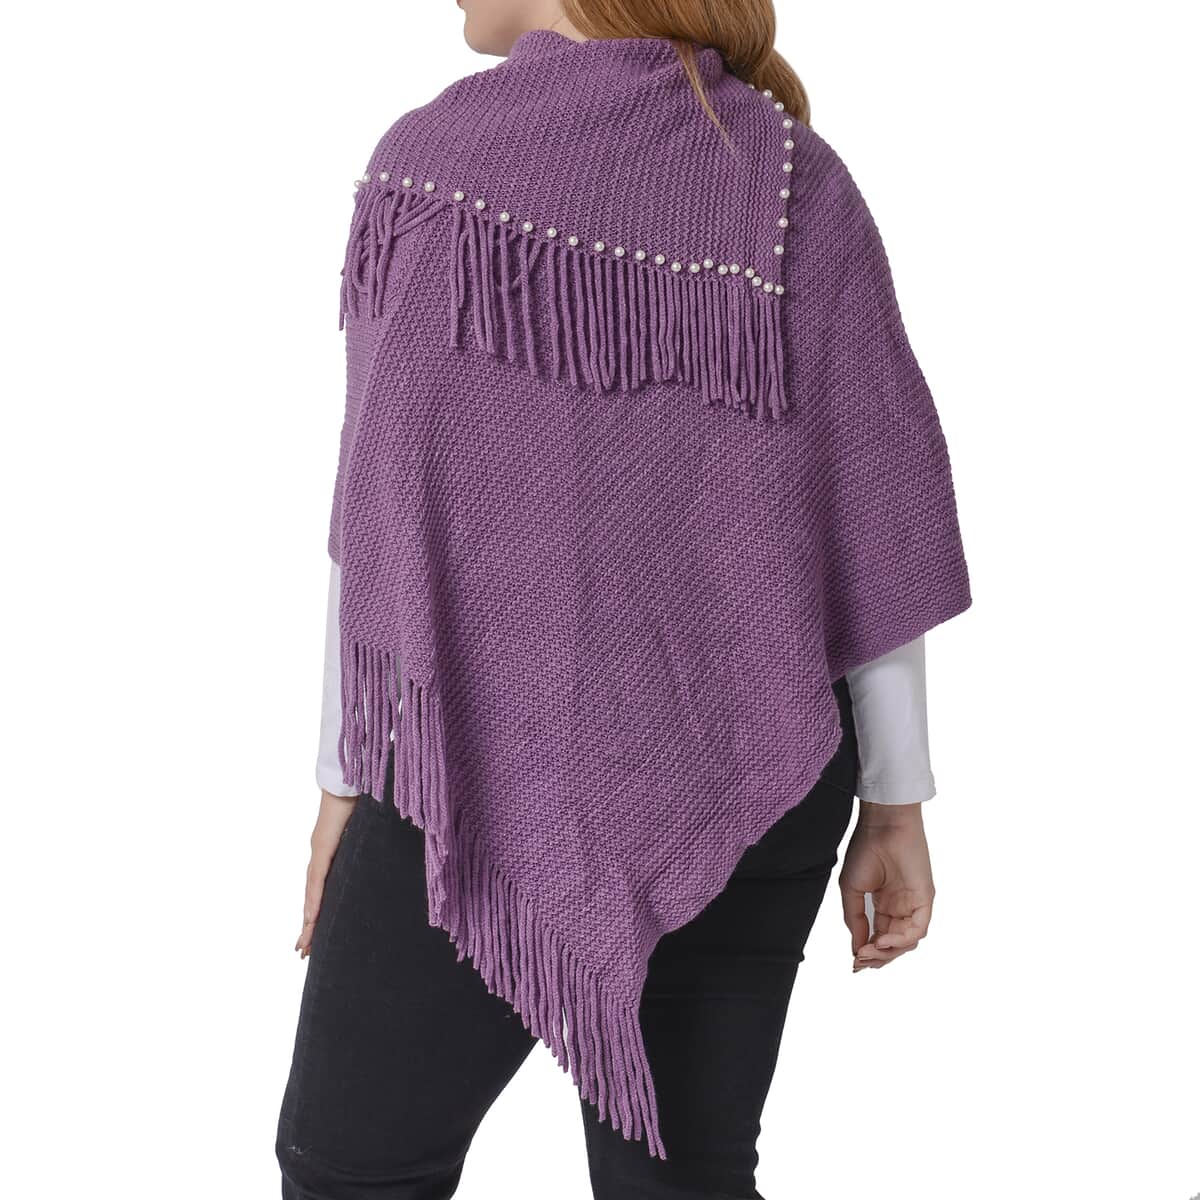 Mauve Cape Neck V-Shape Poncho with Pearls and Fringe Accent (One Size Fits Most, 100% Acrylic) image number 1